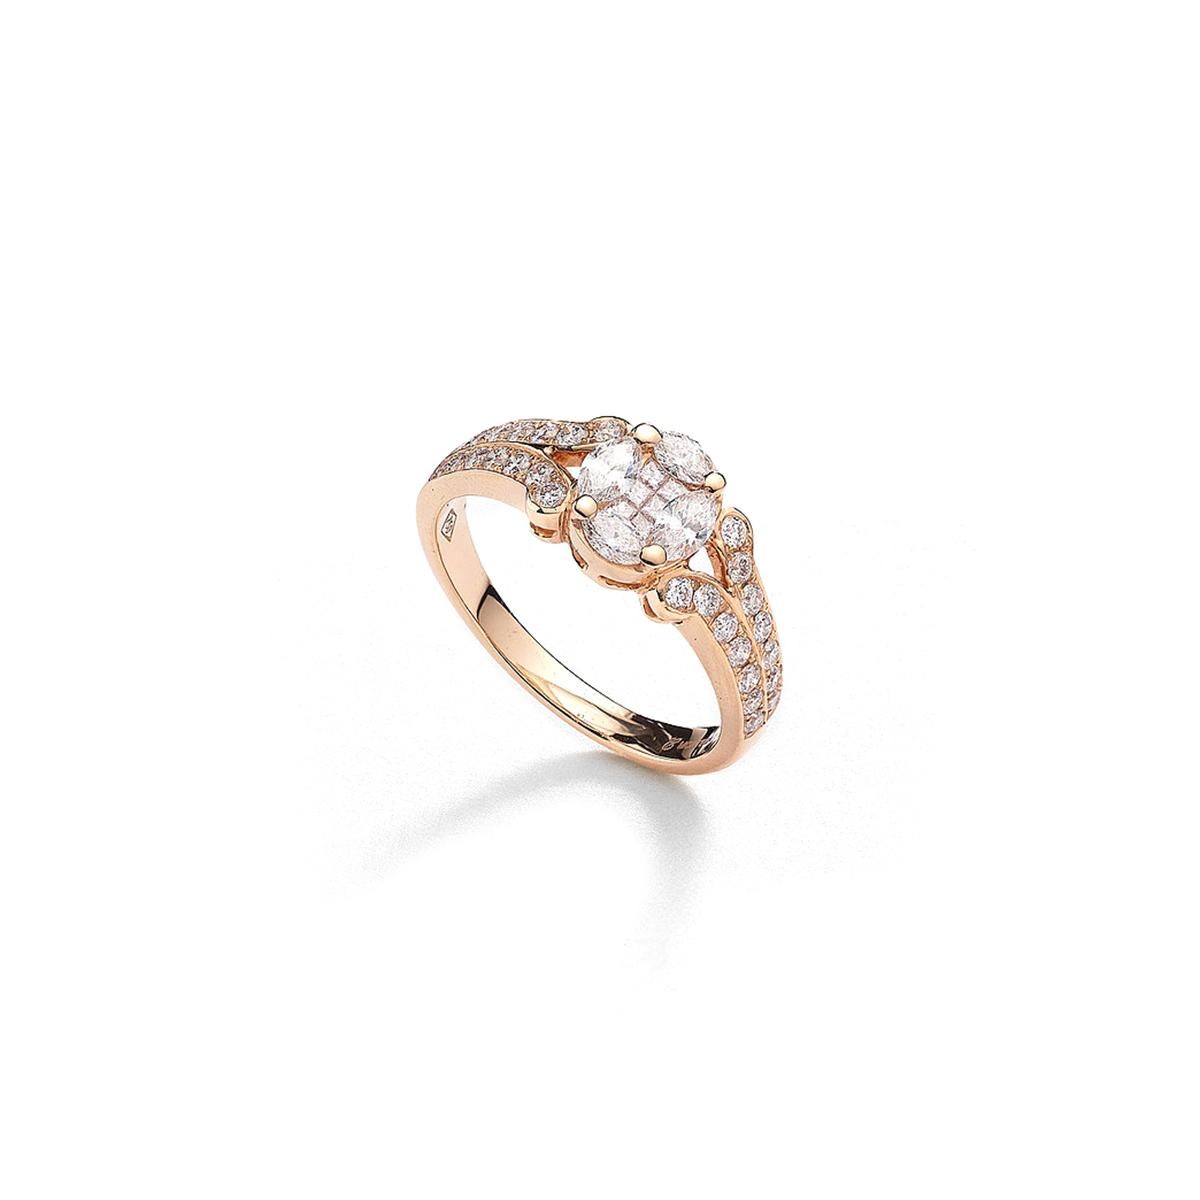 Ring in 18kt pink gold set with 10 marquise and princess cut diamonds 0.44 cts and 28 diamonds 0.39 cts Size 54  